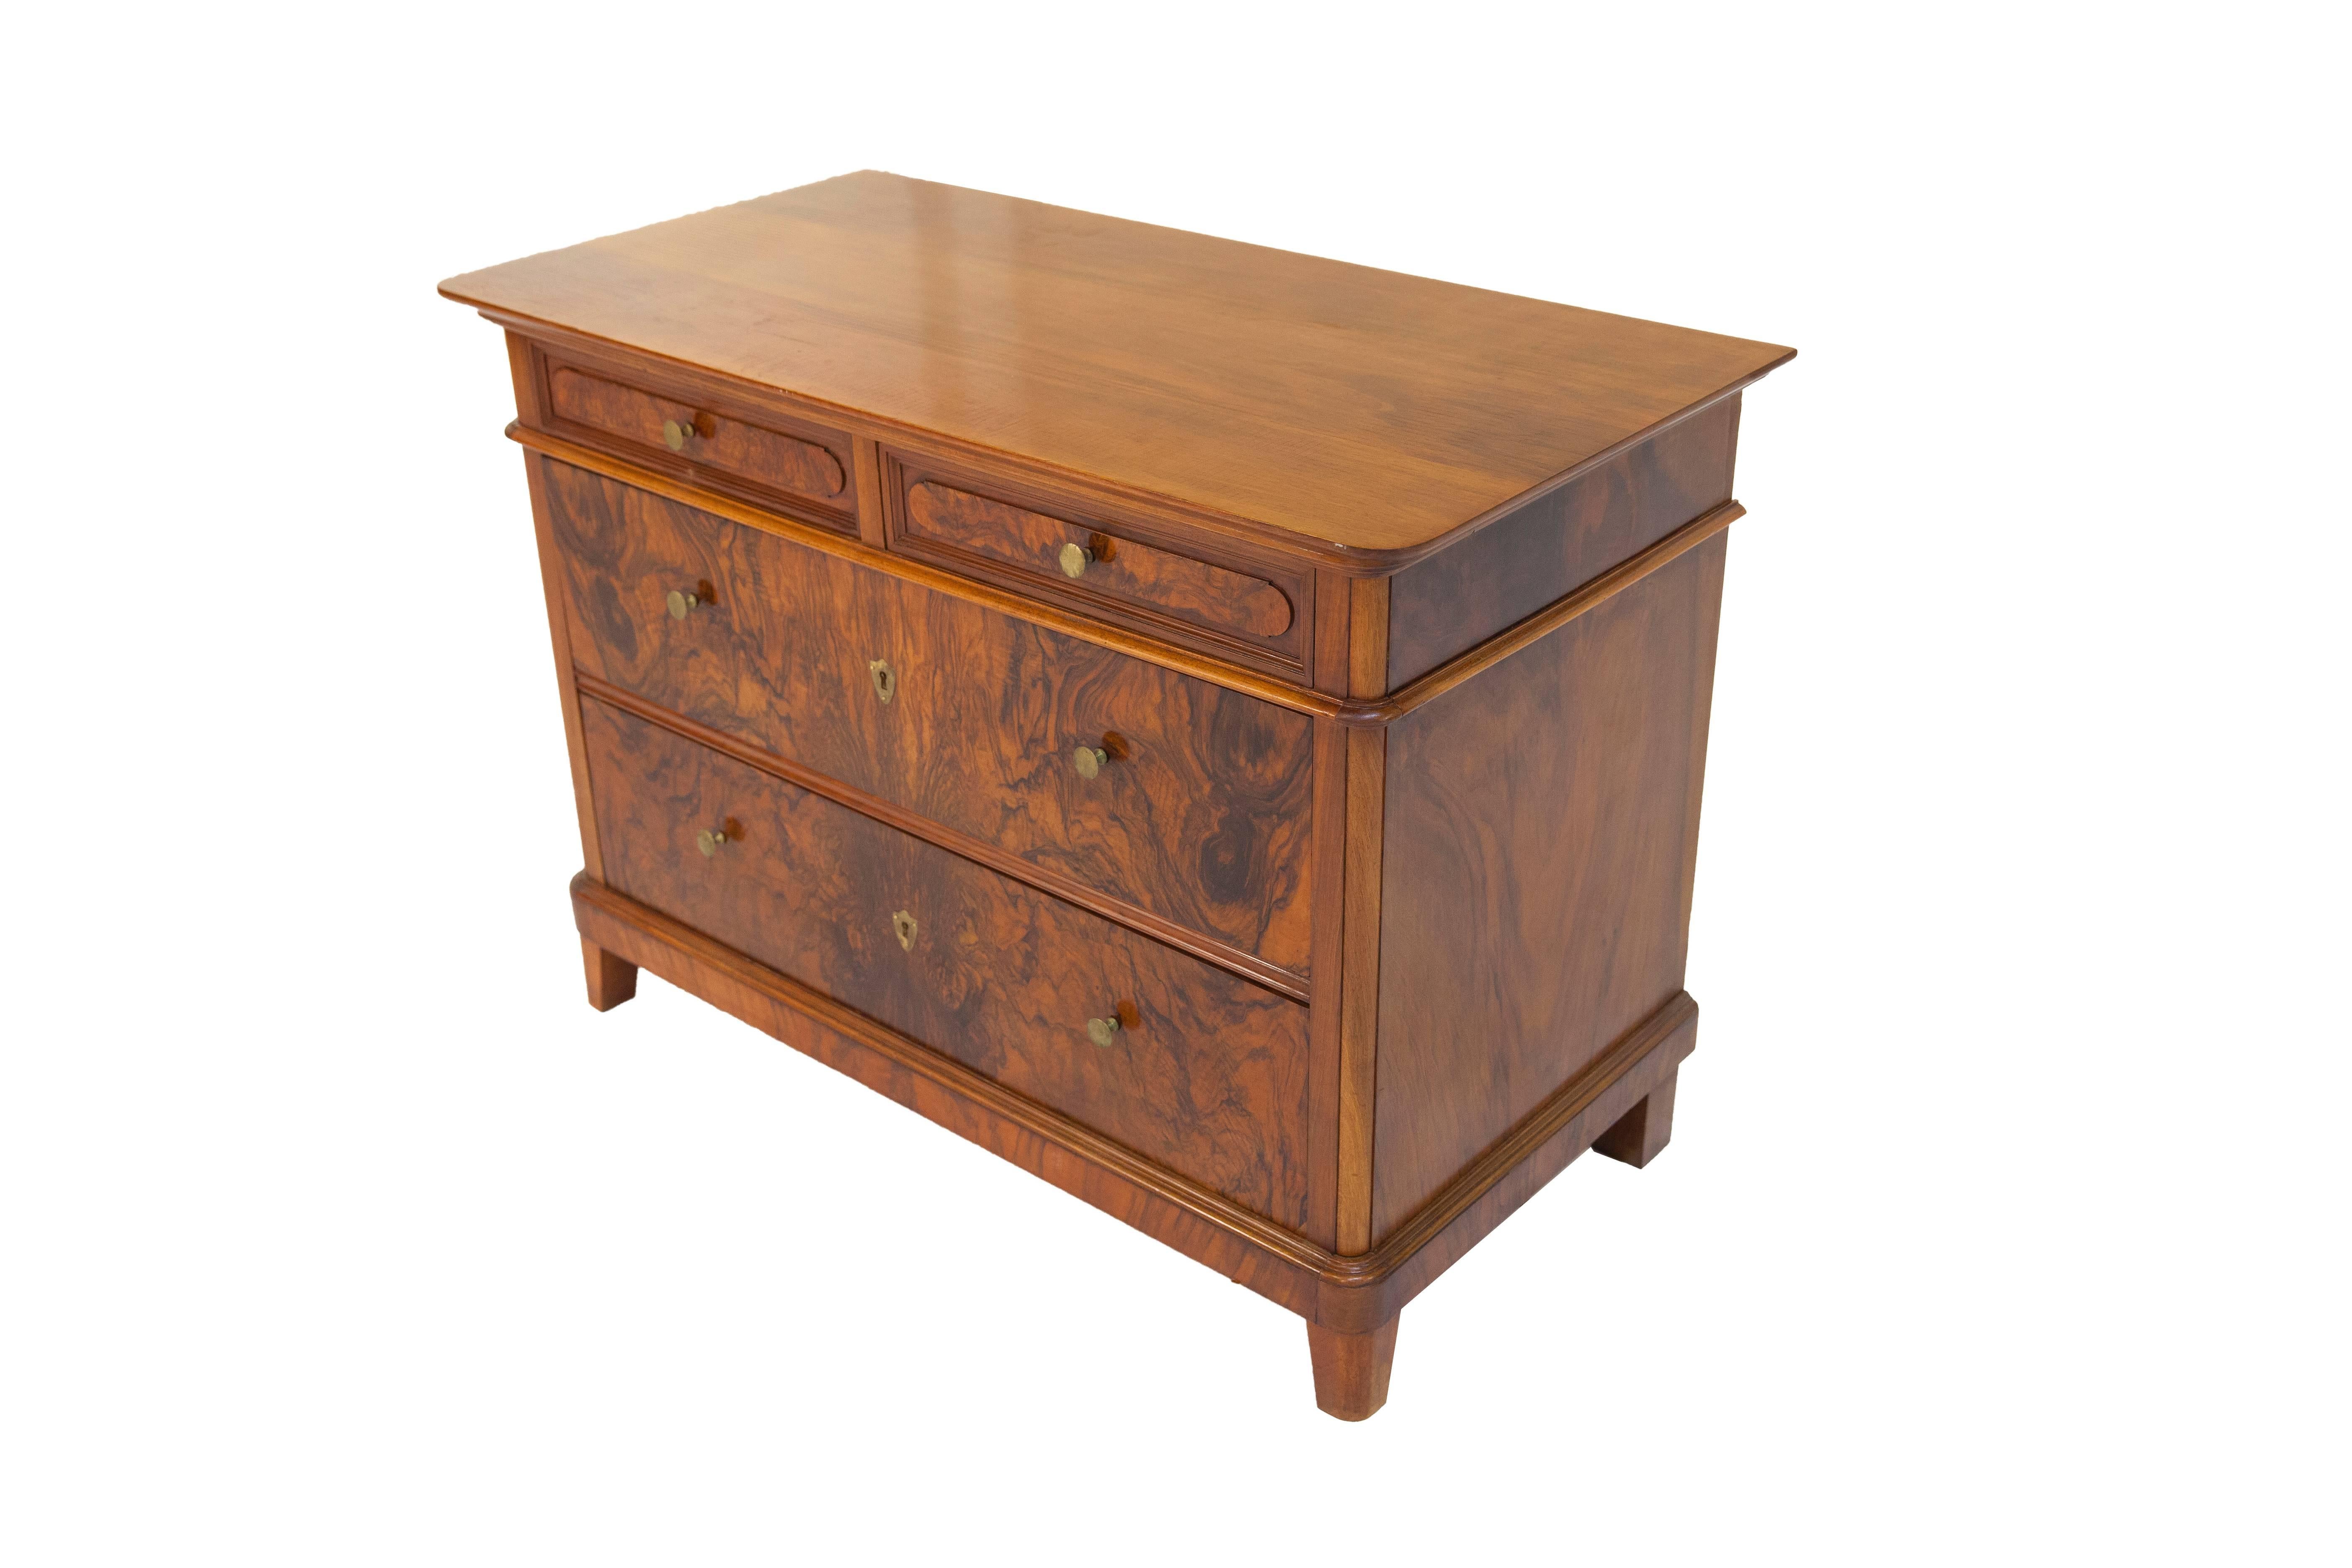 Below its cover plate, the chest of drawers features two drawers side by side, and below these, two spacious drawers, one above the other. The front sides of the drawers are fitted with mirror-inverted walnut and root wood veneer. The sides and